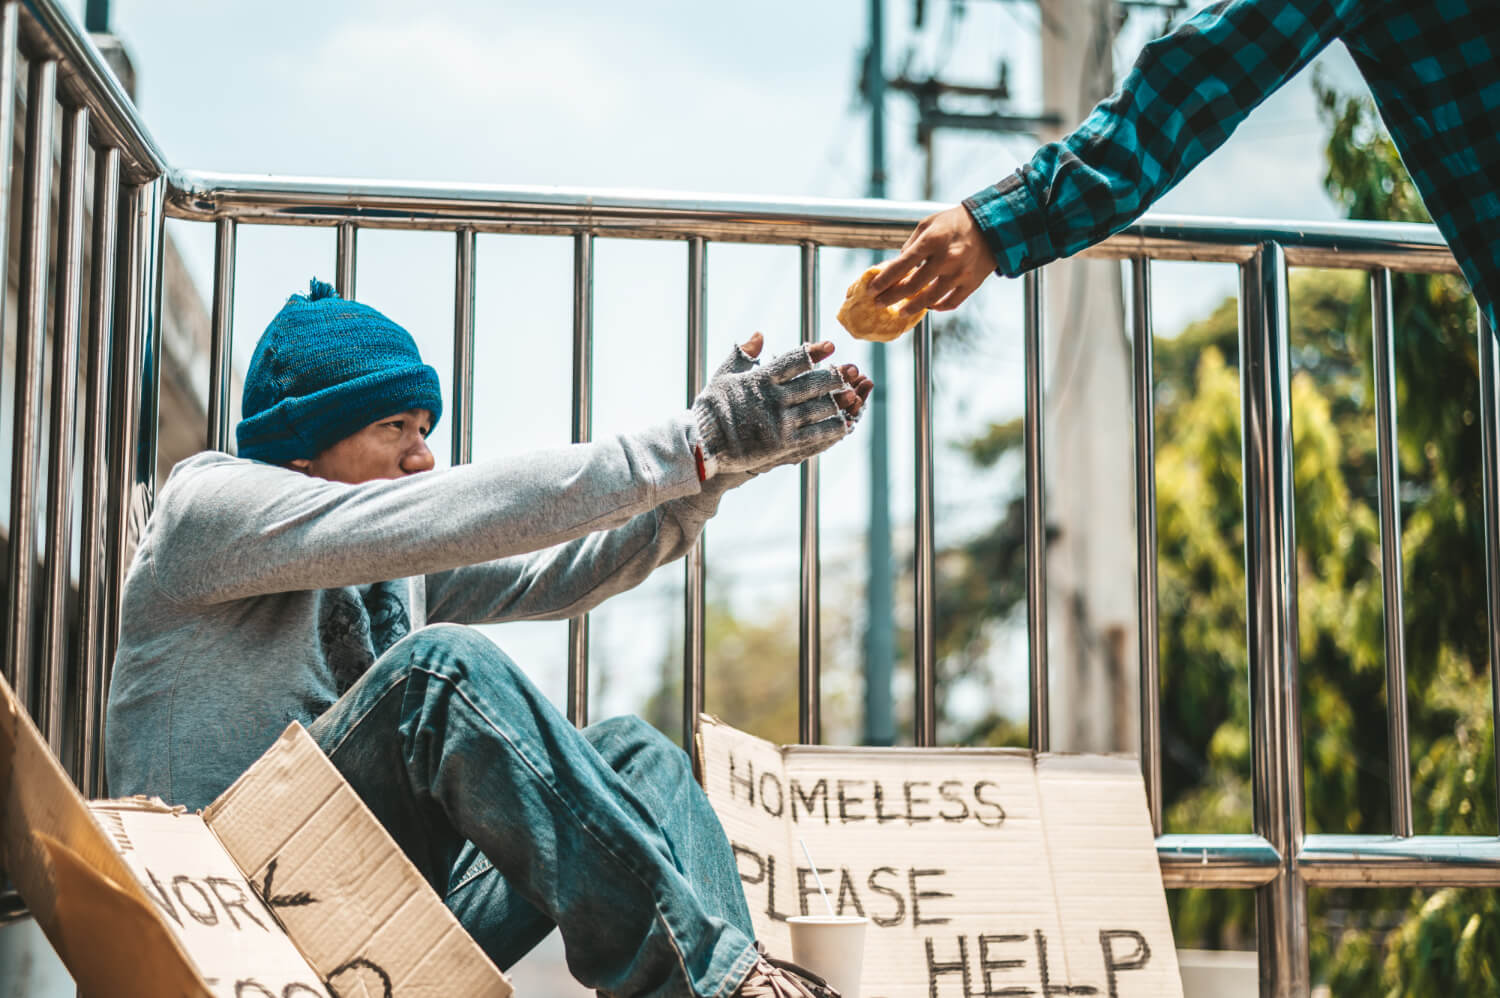 HOW CAN YOU HELP THE HOMELESS INSTEAD OF BUYING THE BIG ISSUE